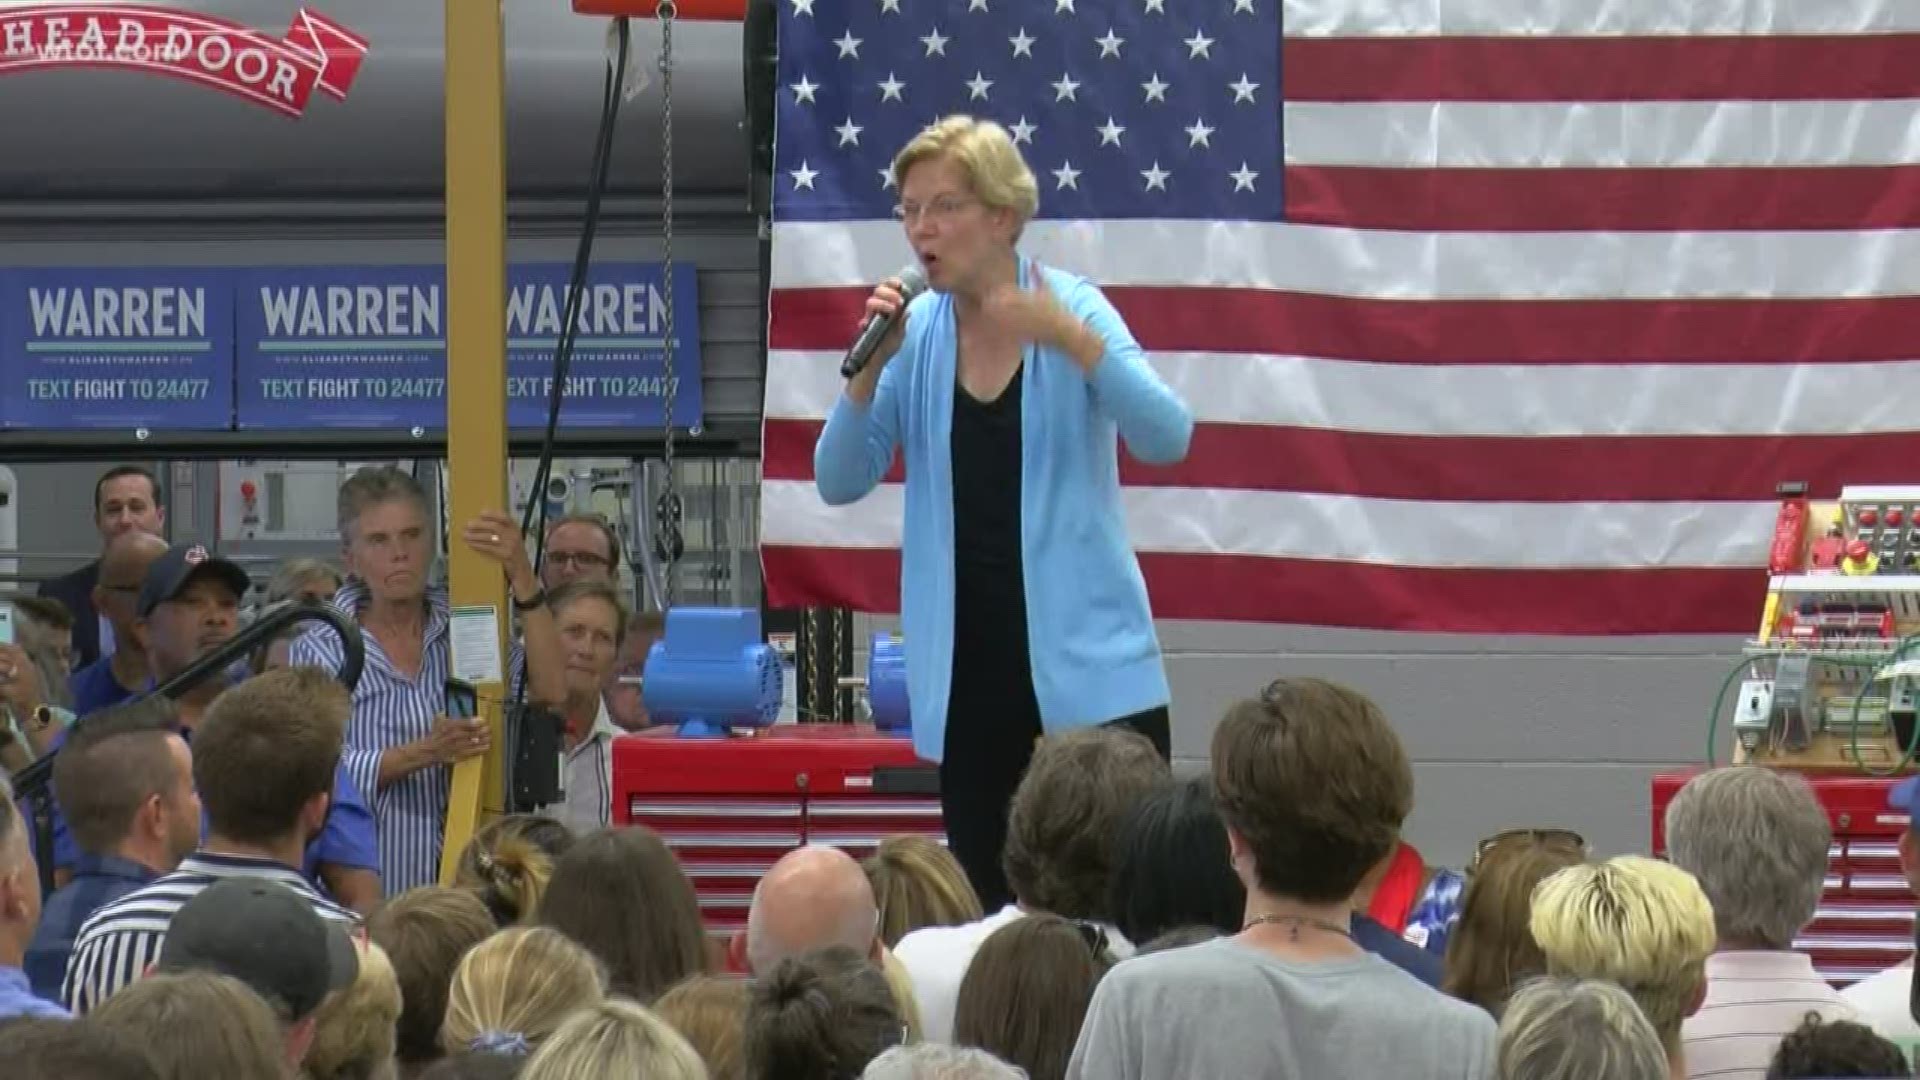 After announcing her trade policy on Monday, Warren's campaign stop in Toledo focused on the economy with heavy criticism to "giant multinational corporations."